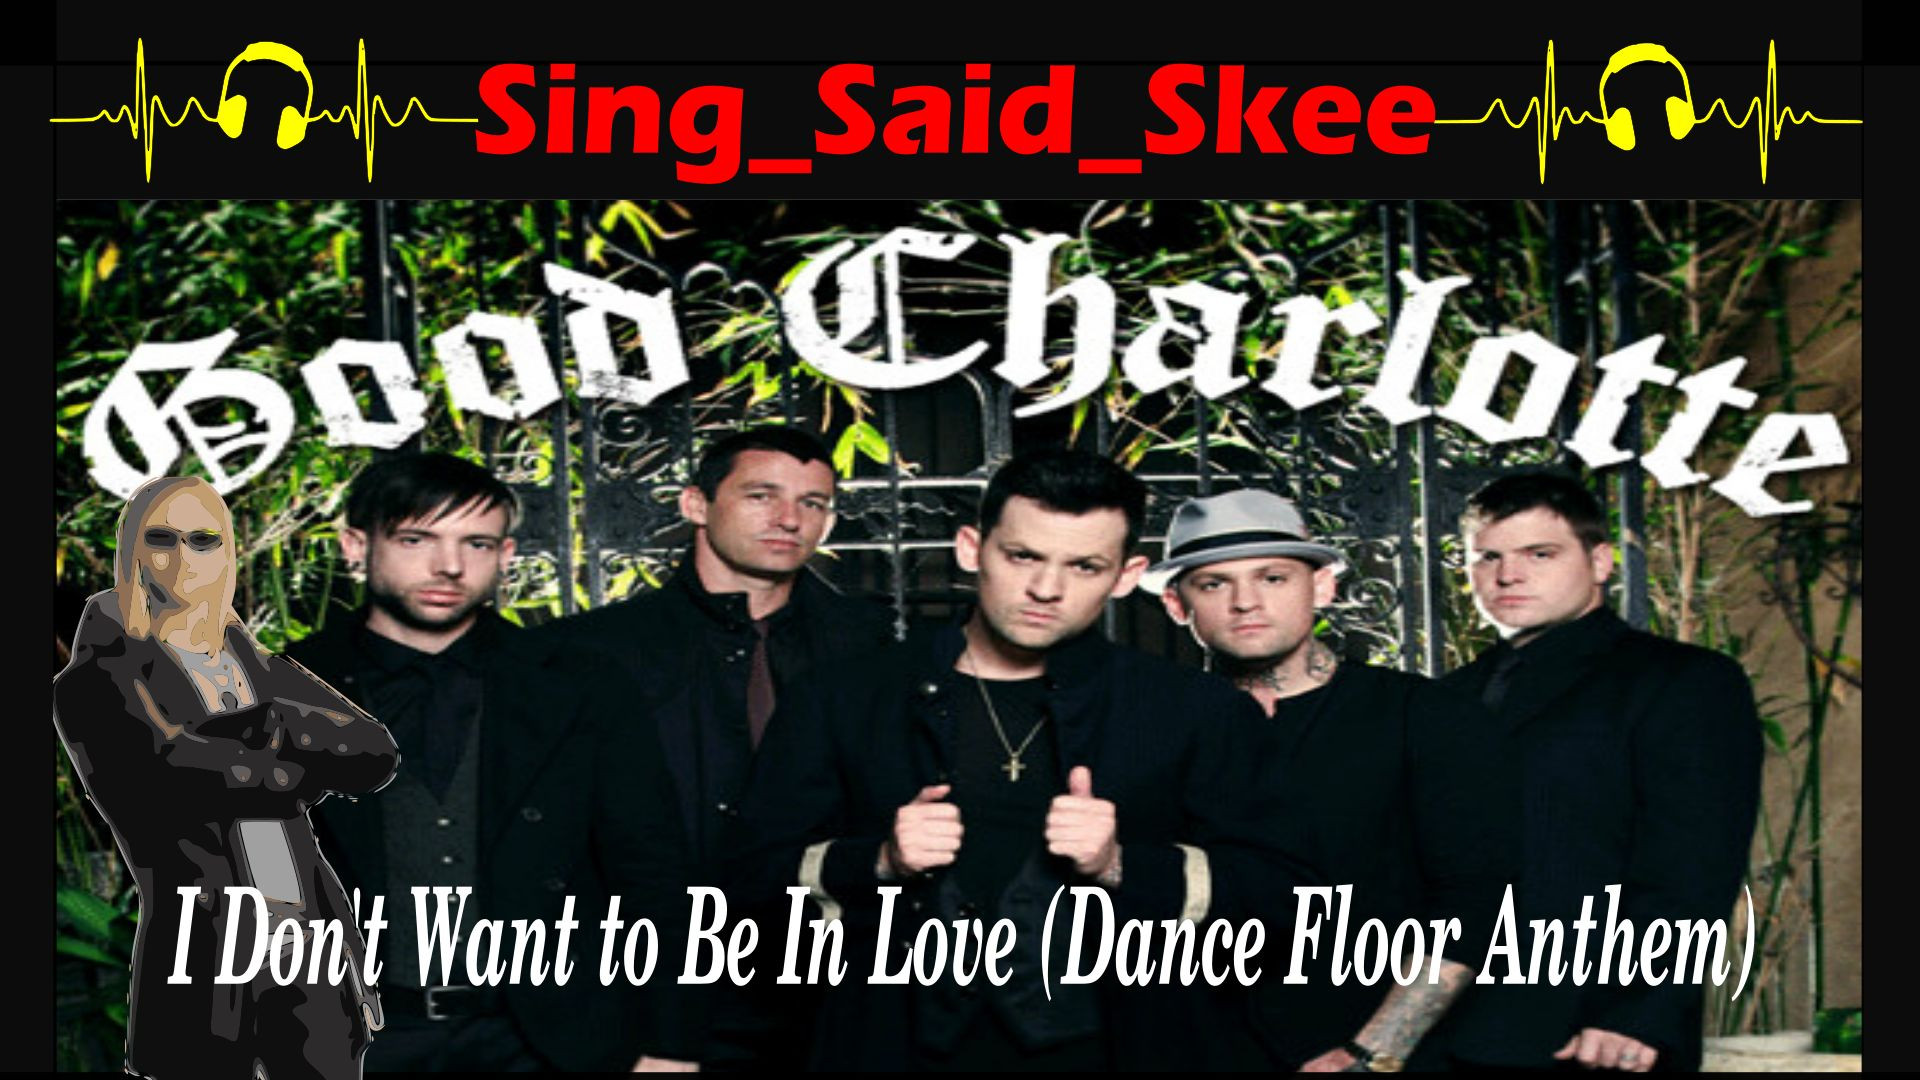 I Don't Want To Be In Love (Dance Floor Anthem) - Good Charlotte - Sing_Said_Skee